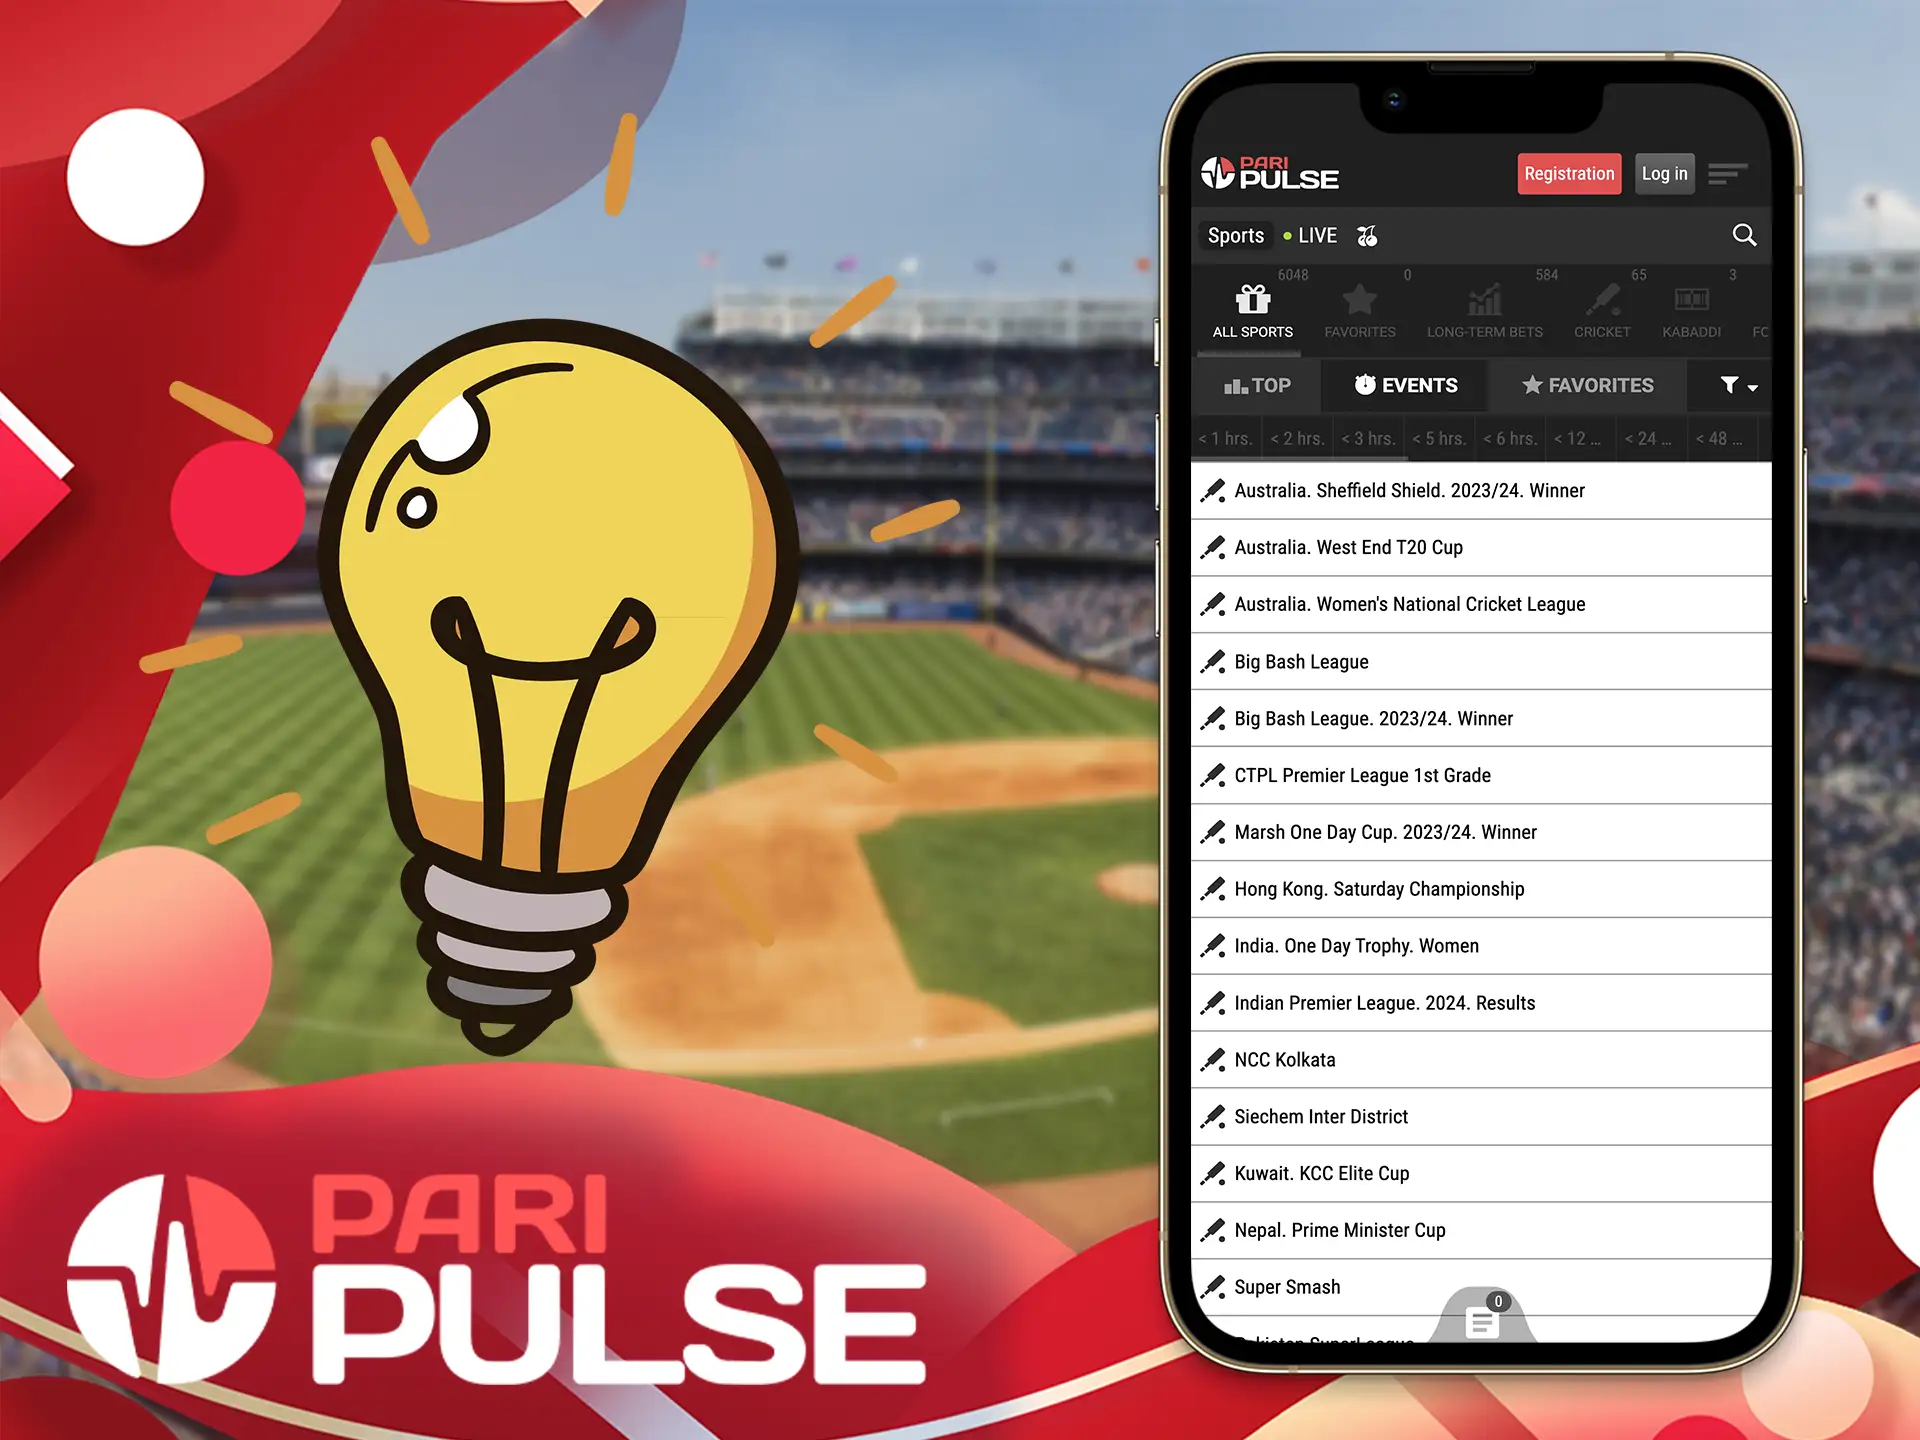 Dive into an abundance of betting types right on your smartphone, anywhere you want, thanks to the PariPulse app.